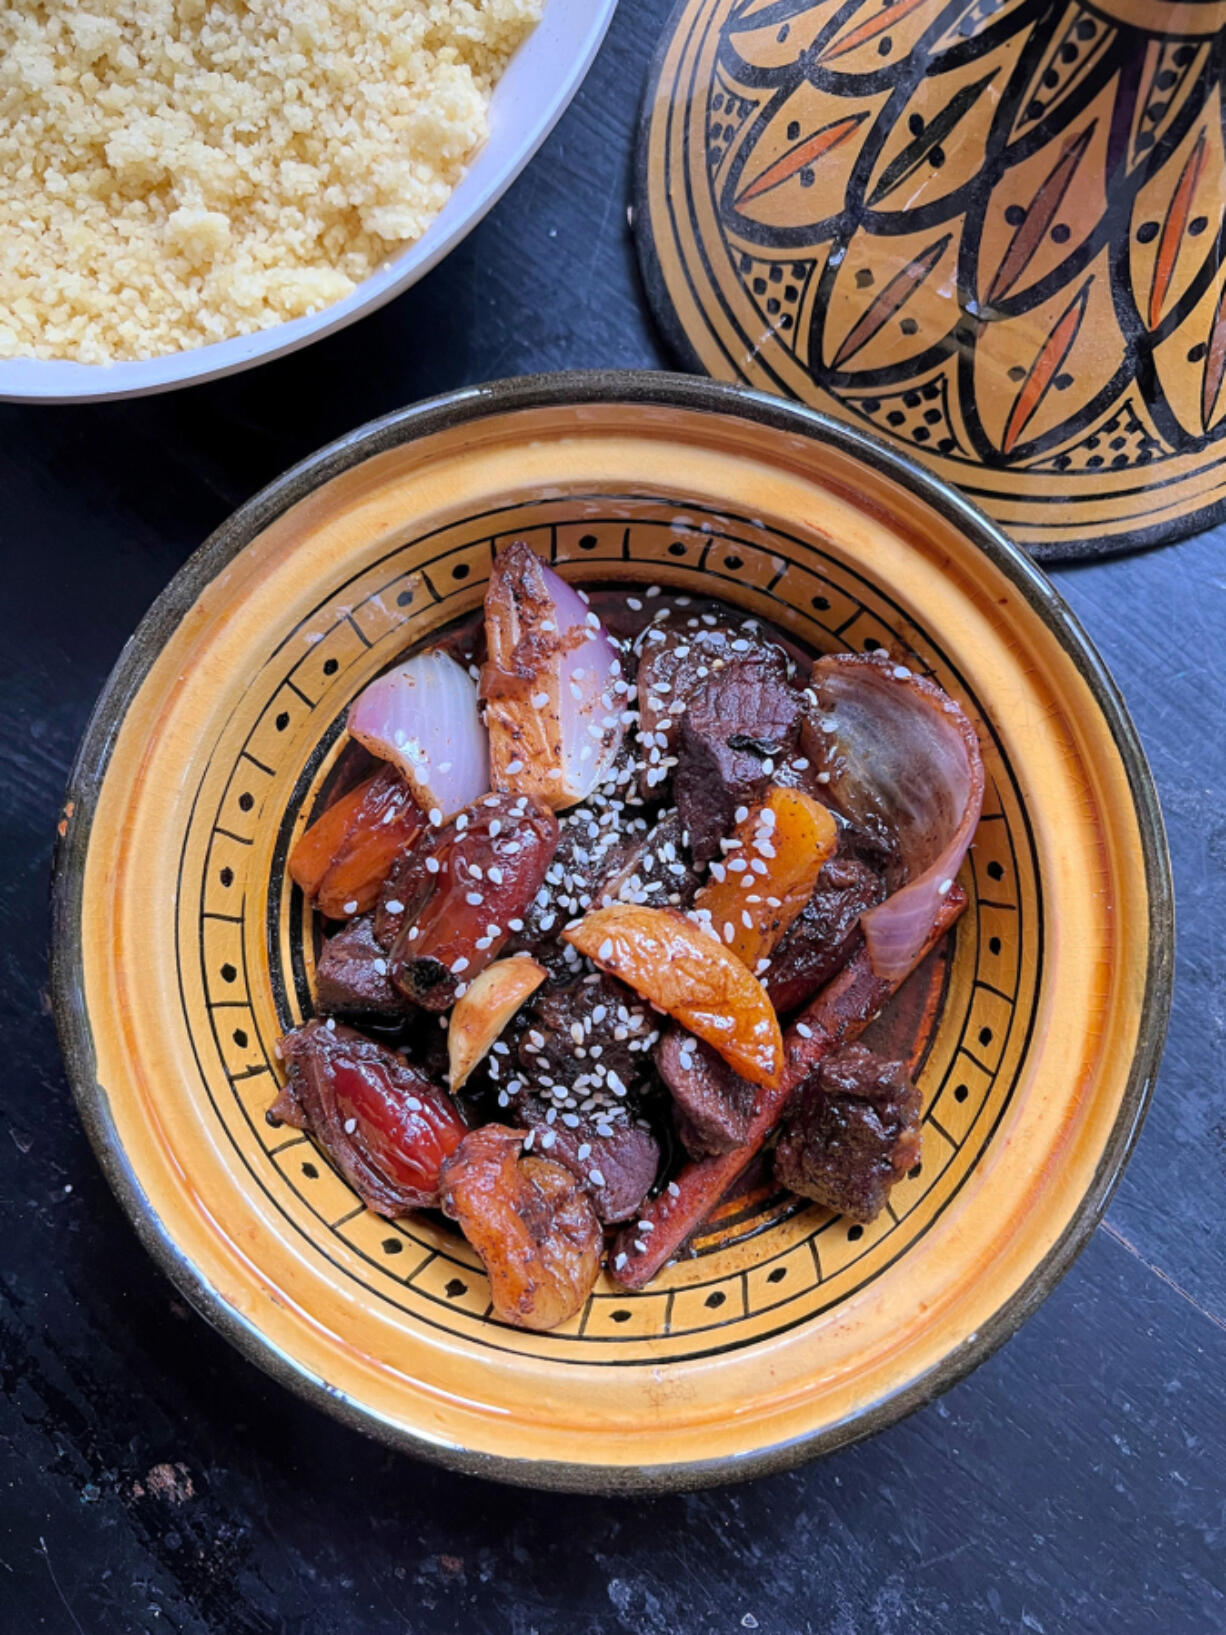 Dates, commonly known as the &ldquo;bread of the dessert&rdquo; in the Middle East, give a sweet supporting hand to this easy lamb tagine.